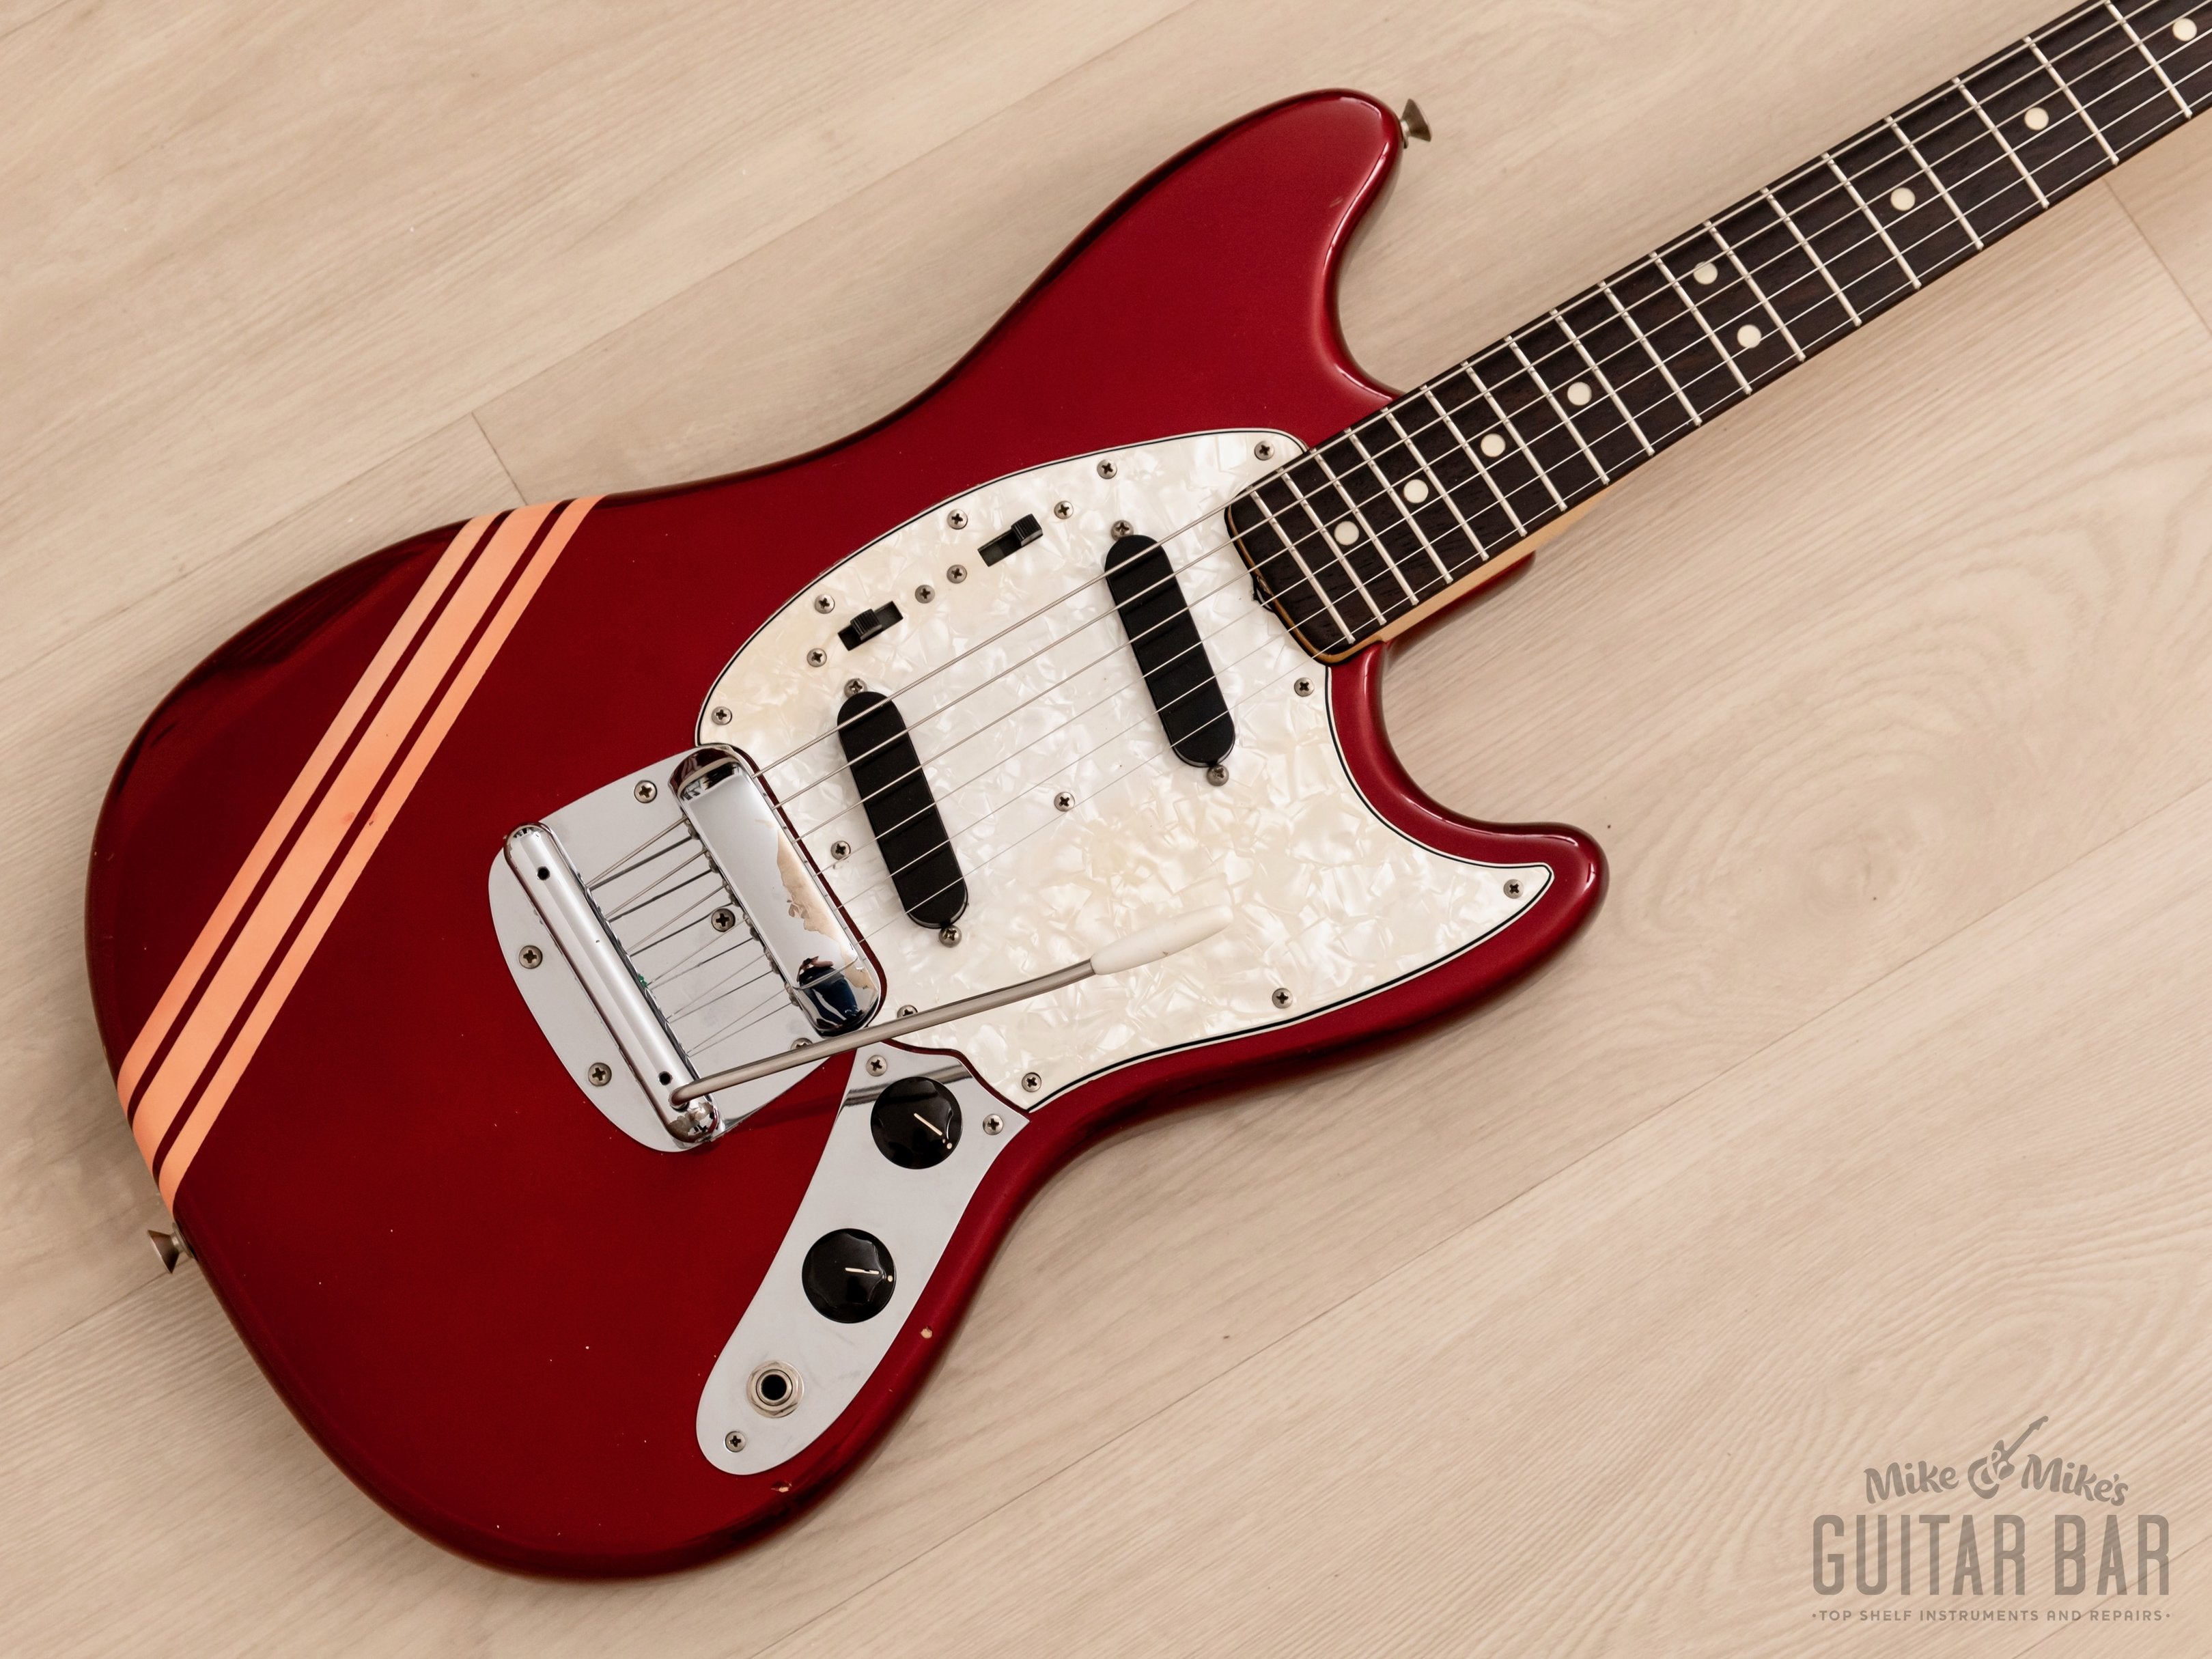 1972 Fender Mustang Vintage Offset Electric Guitar Competition Red Collector-Grade w/ Case, Warranty Card